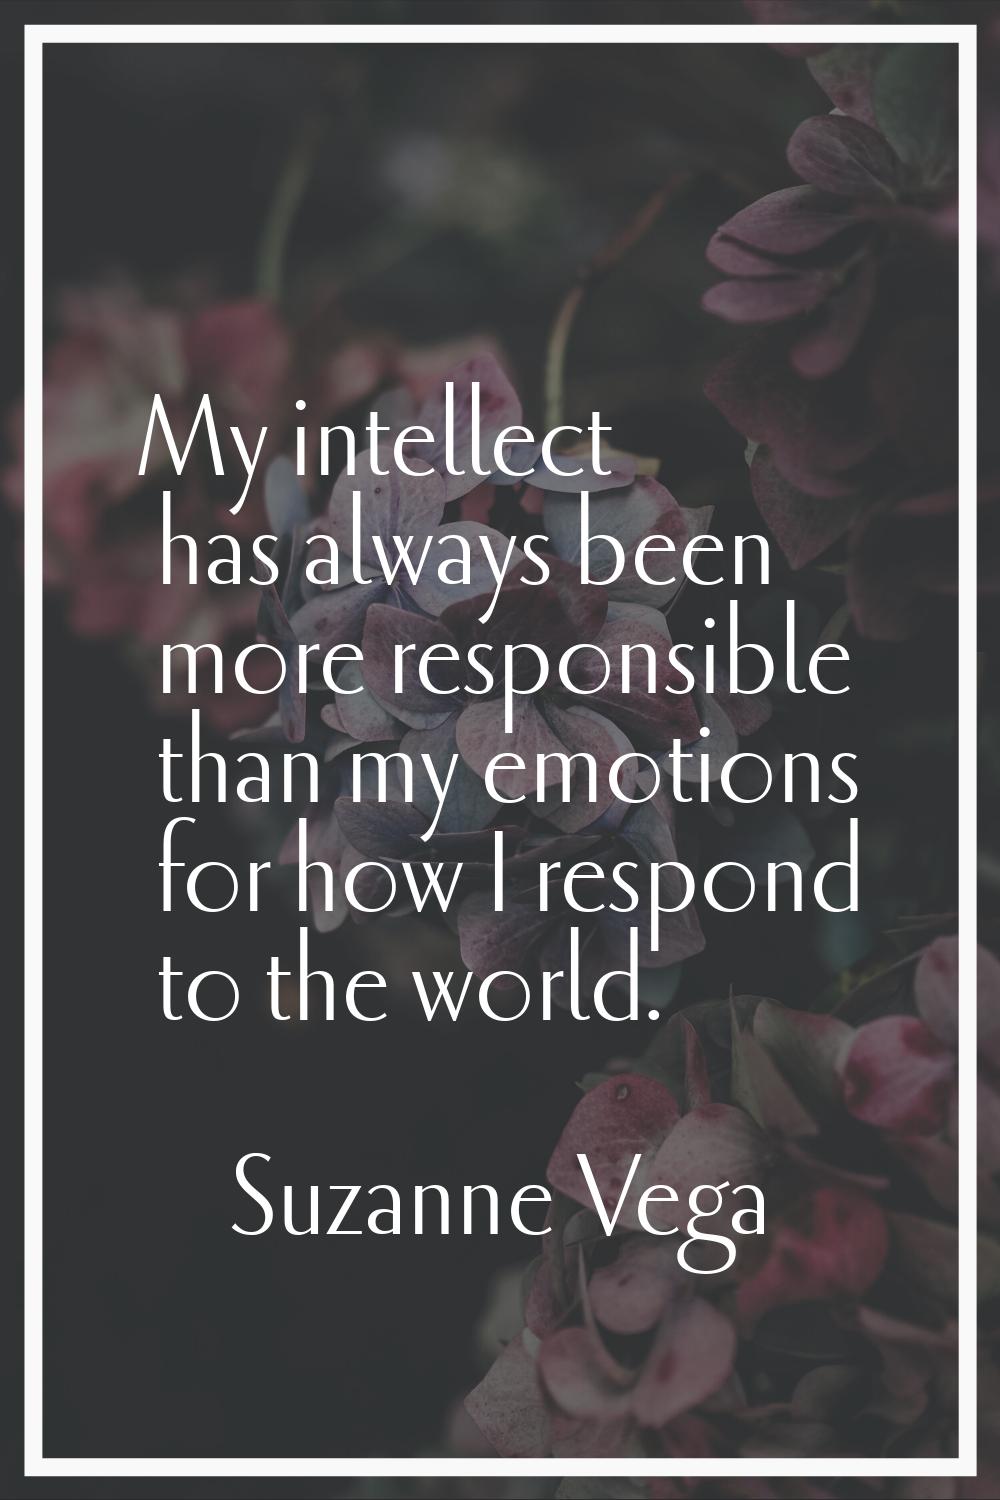 My intellect has always been more responsible than my emotions for how I respond to the world.